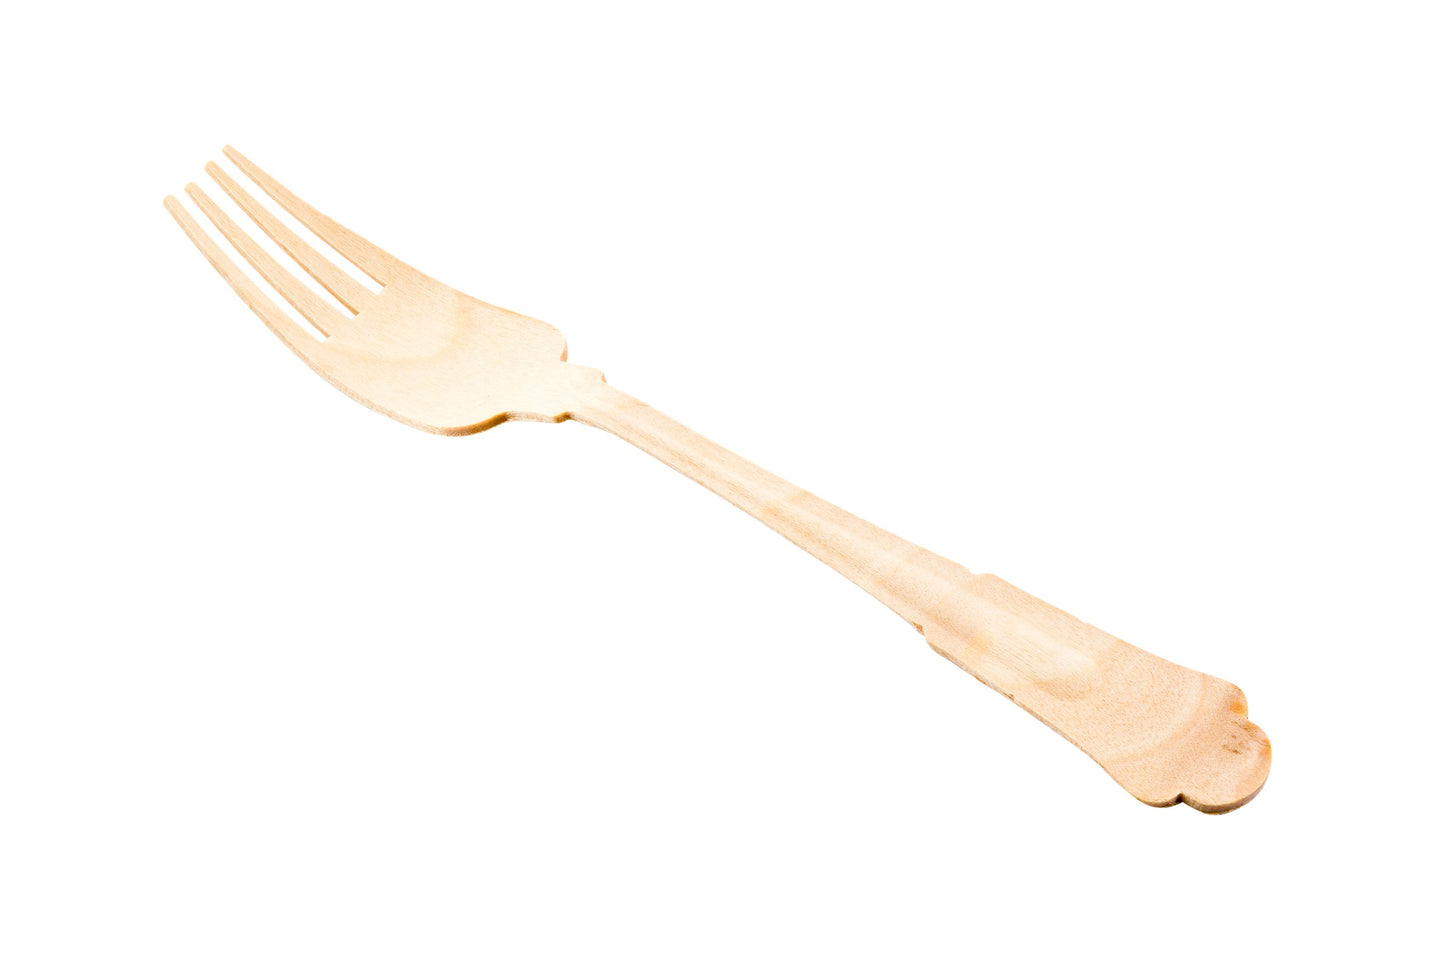 Baroque Wood Fork 19.94 cm 500 count box